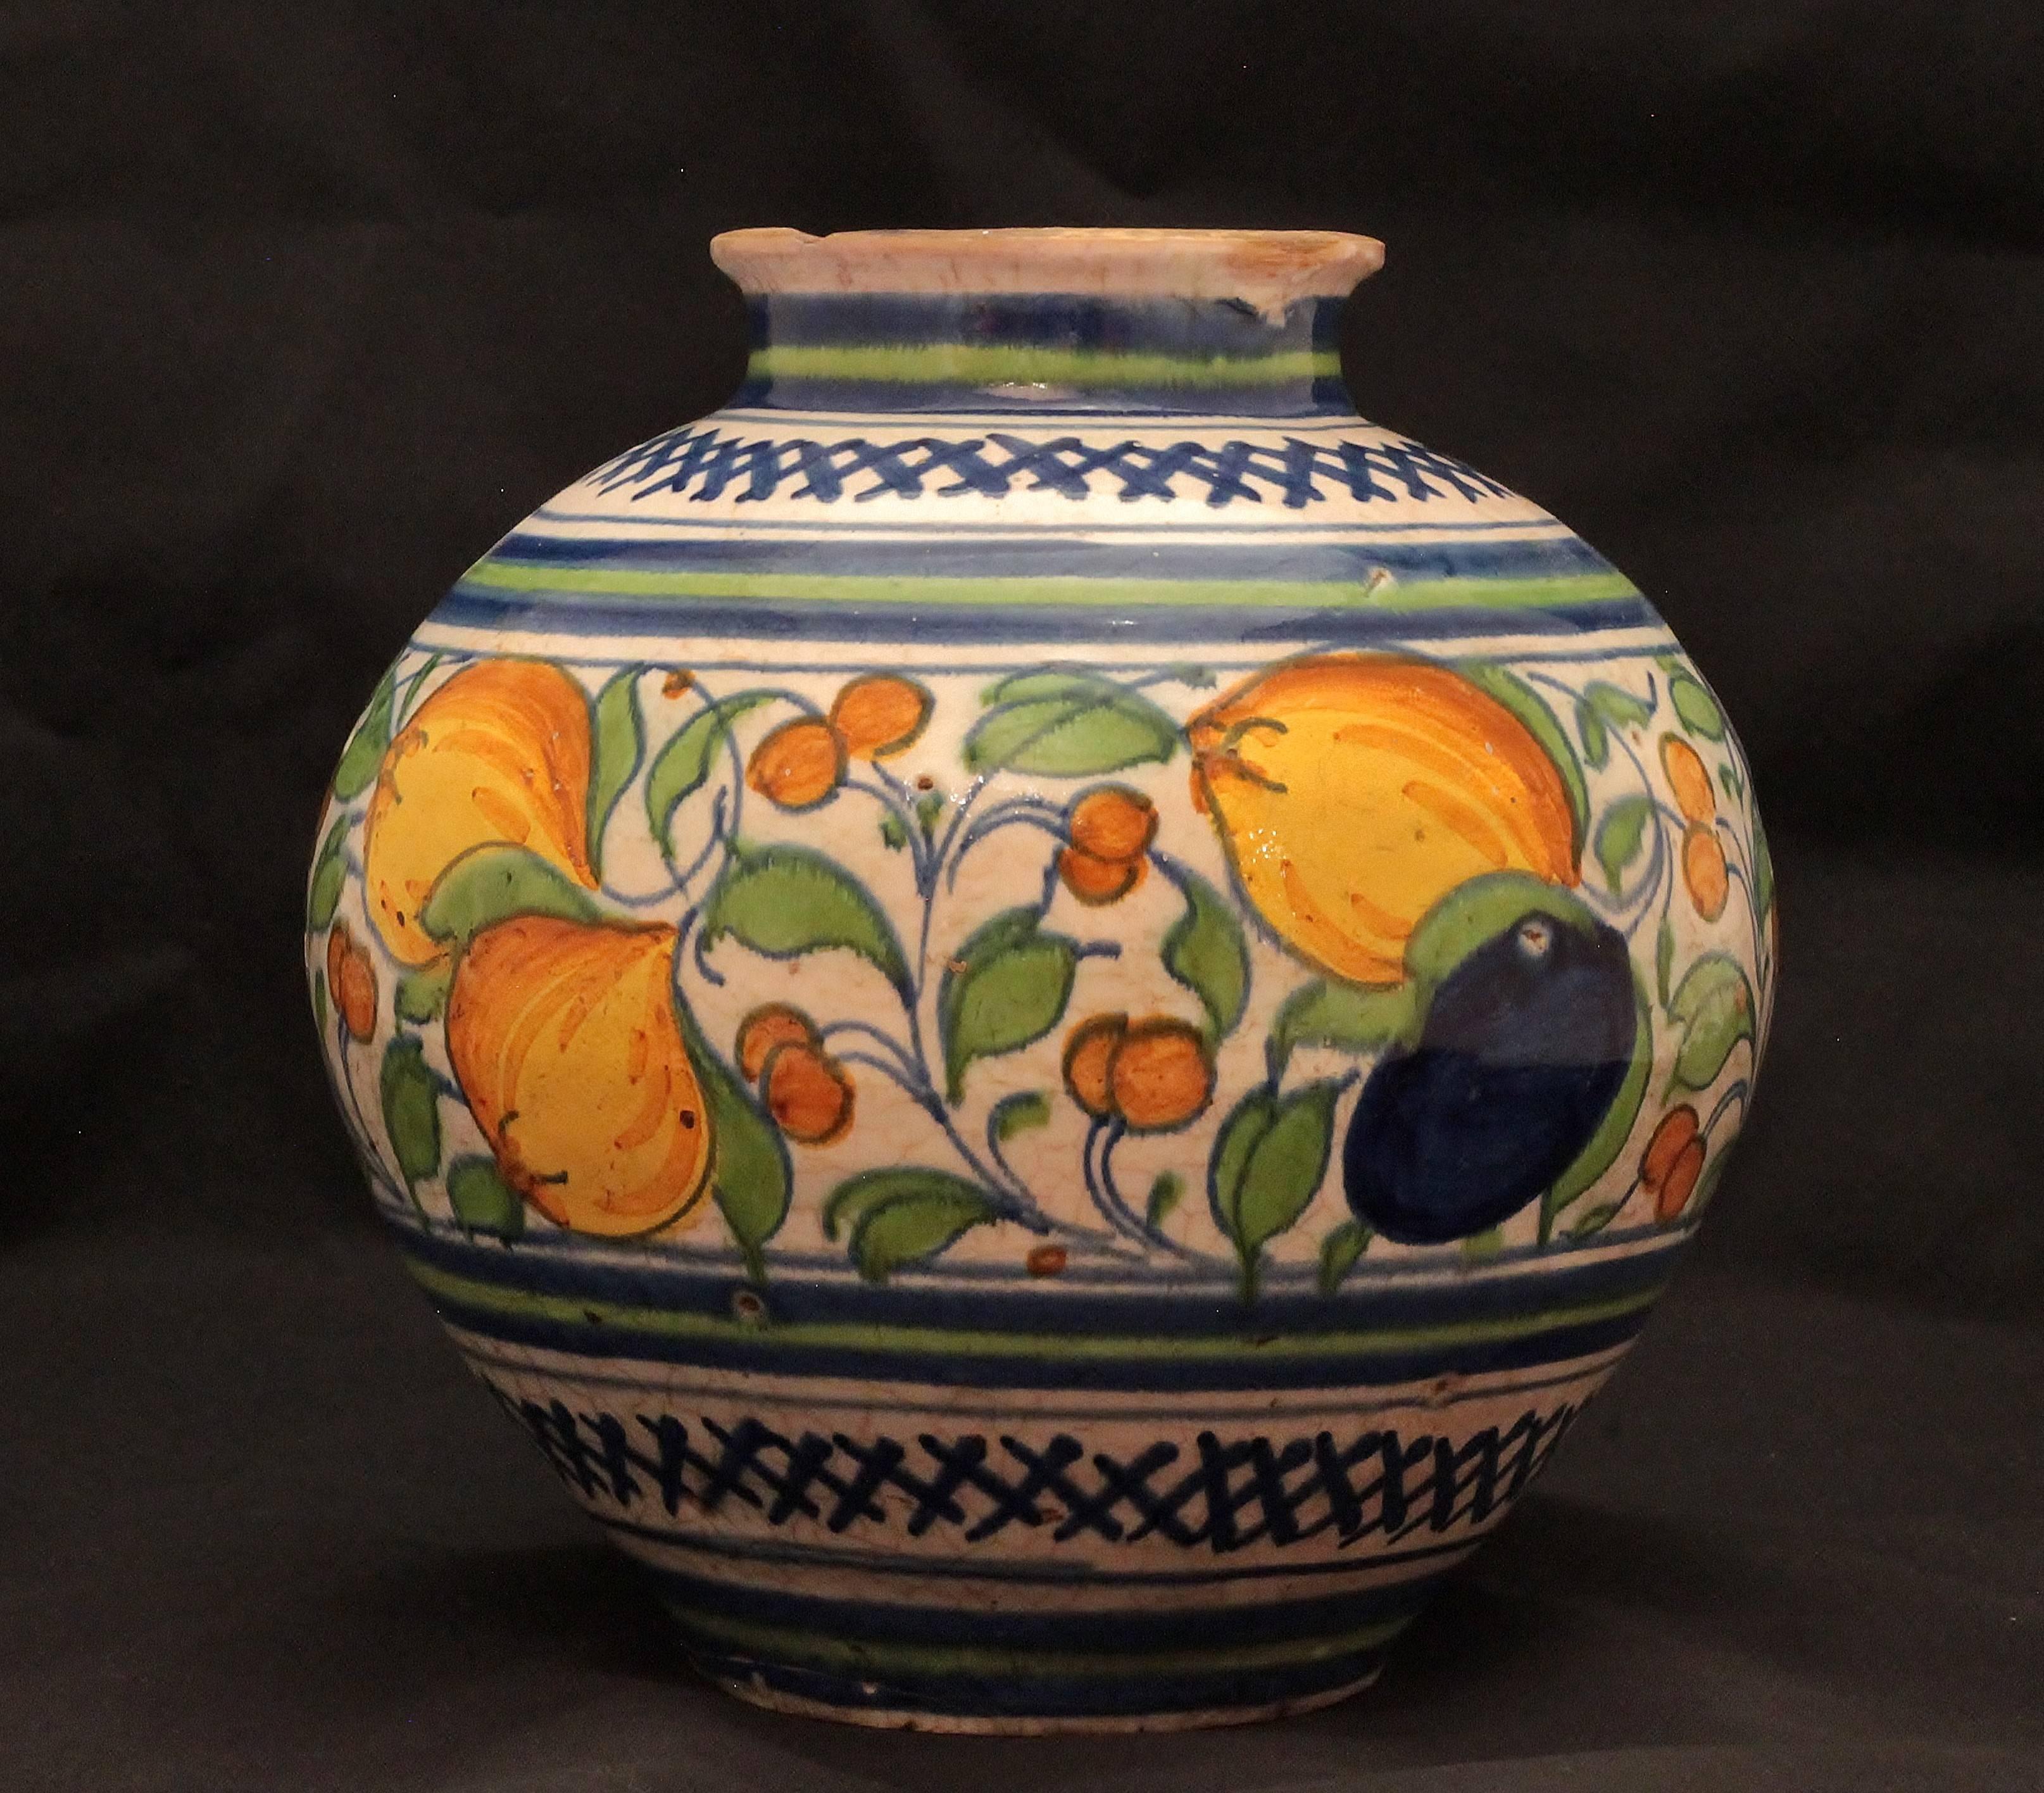 A Venise Majolica vase or bowl decorates of flowers and fruits says “a fiore e a frutti”.
Workshop of Maestro Domenico.
Second half of 16th century. 

Measures: Height 24.2 cm., diameter 23 cm.
 